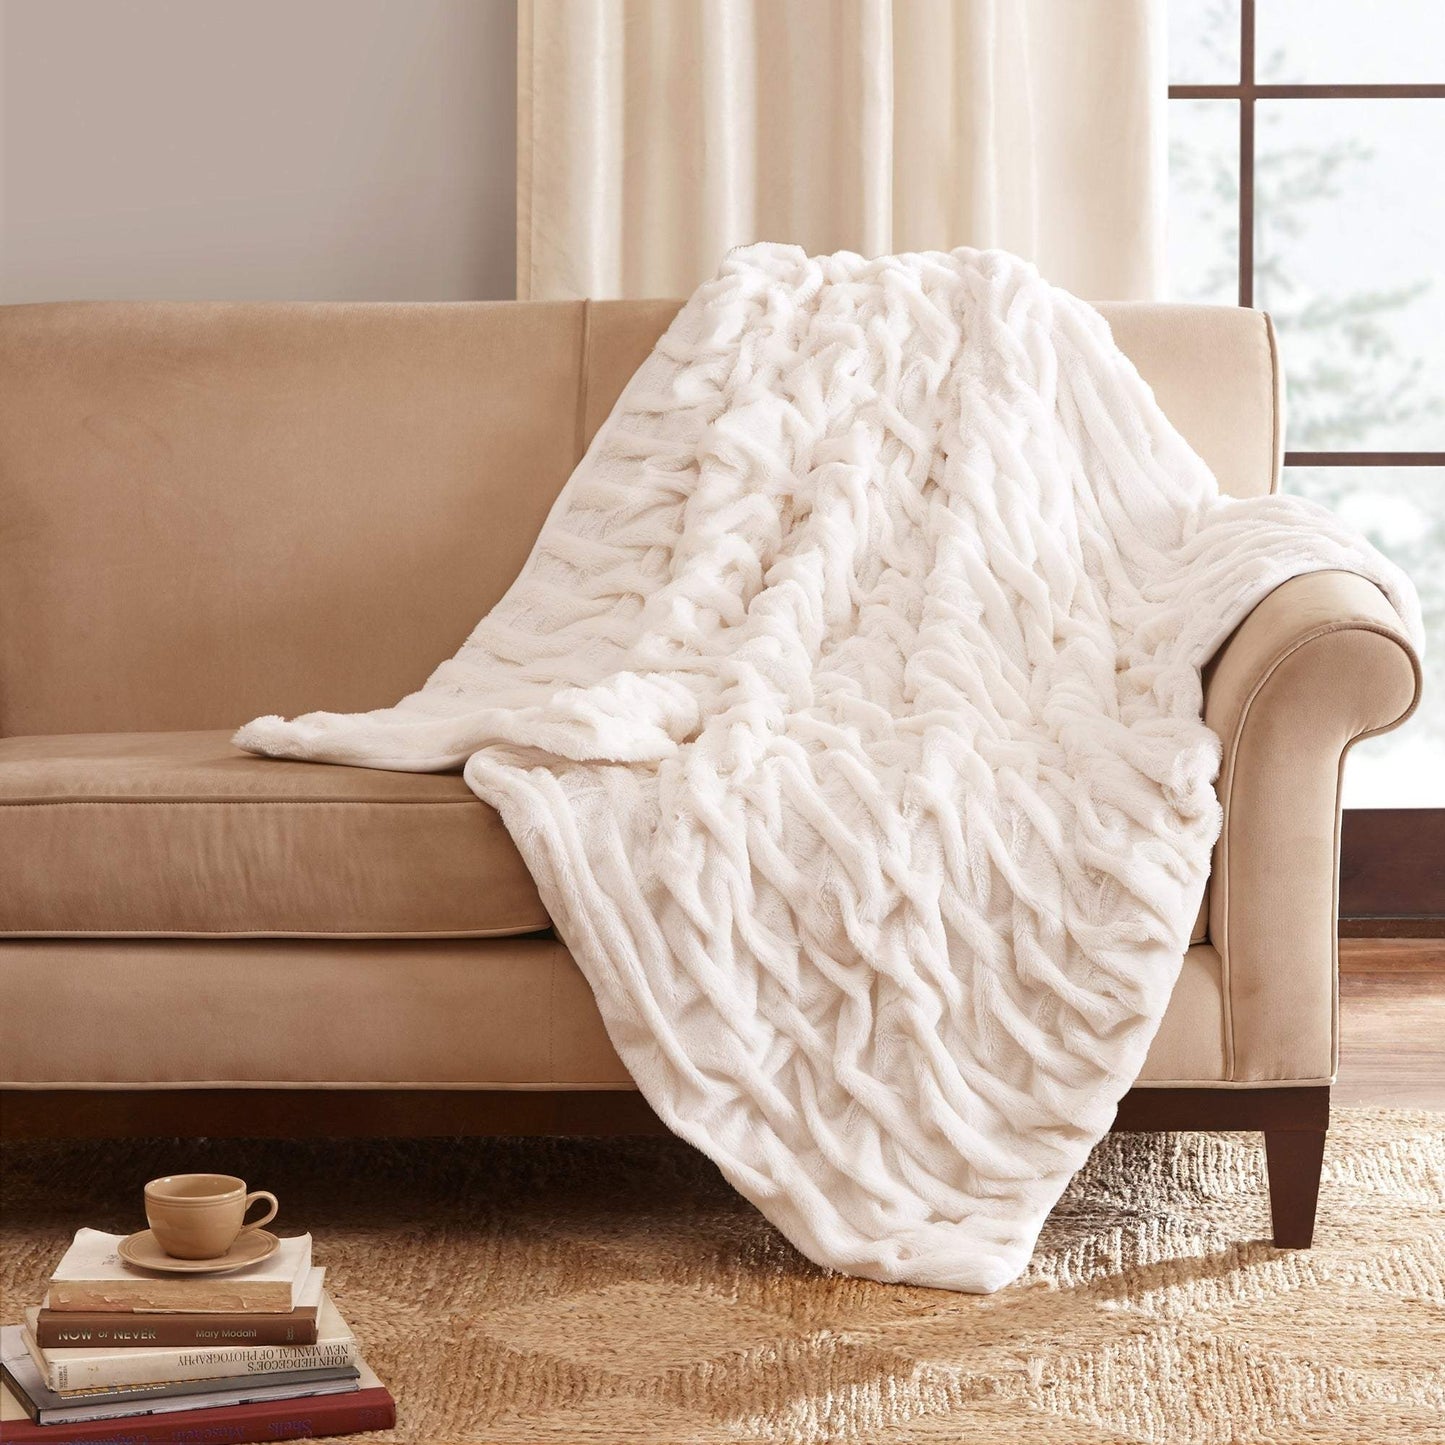 Madison Park Bed & Bath ivory Madison Park - Long Fur Knitted Ivory Throw